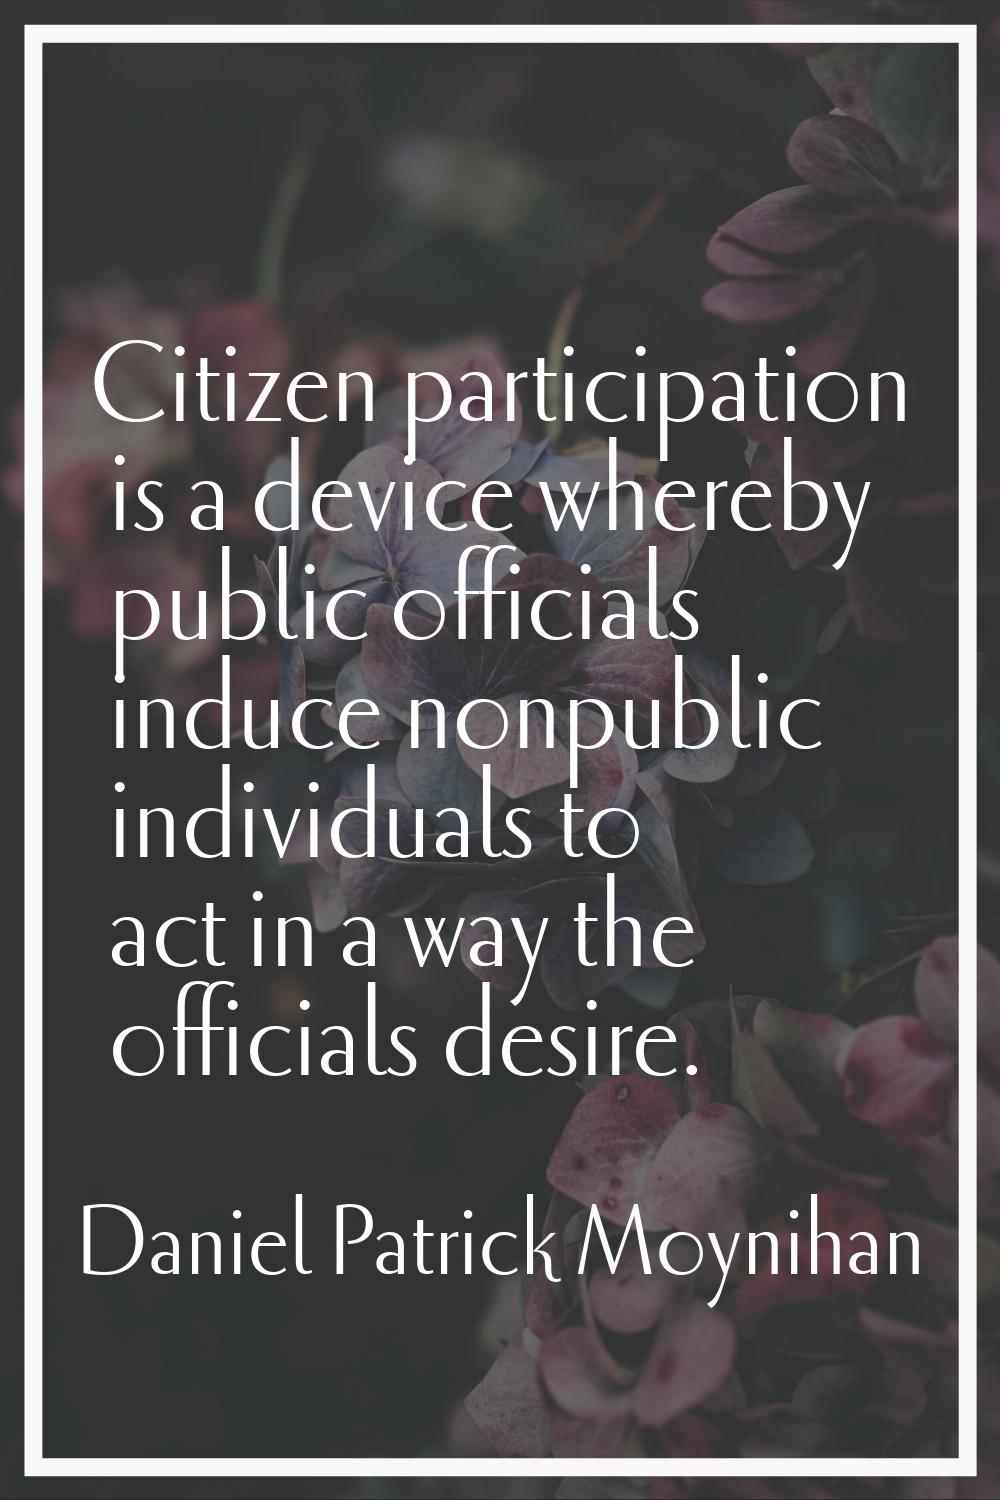 Citizen participation is a device whereby public officials induce nonpublic individuals to act in a